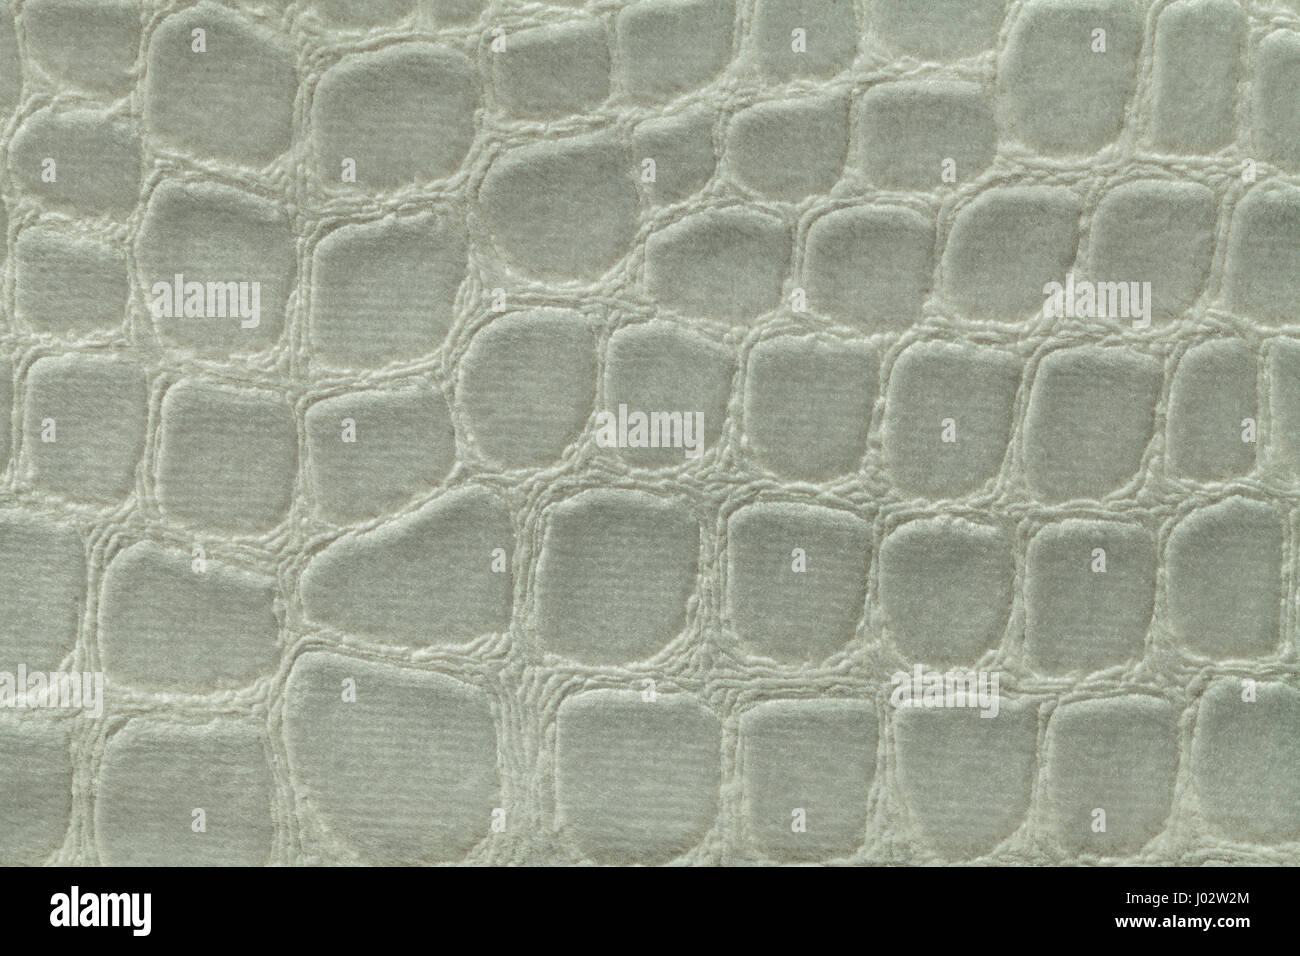 Vintage Green Crocodile Skin Texture Stock Photo, Picture And Royalty Free  Image. Image 13880261.